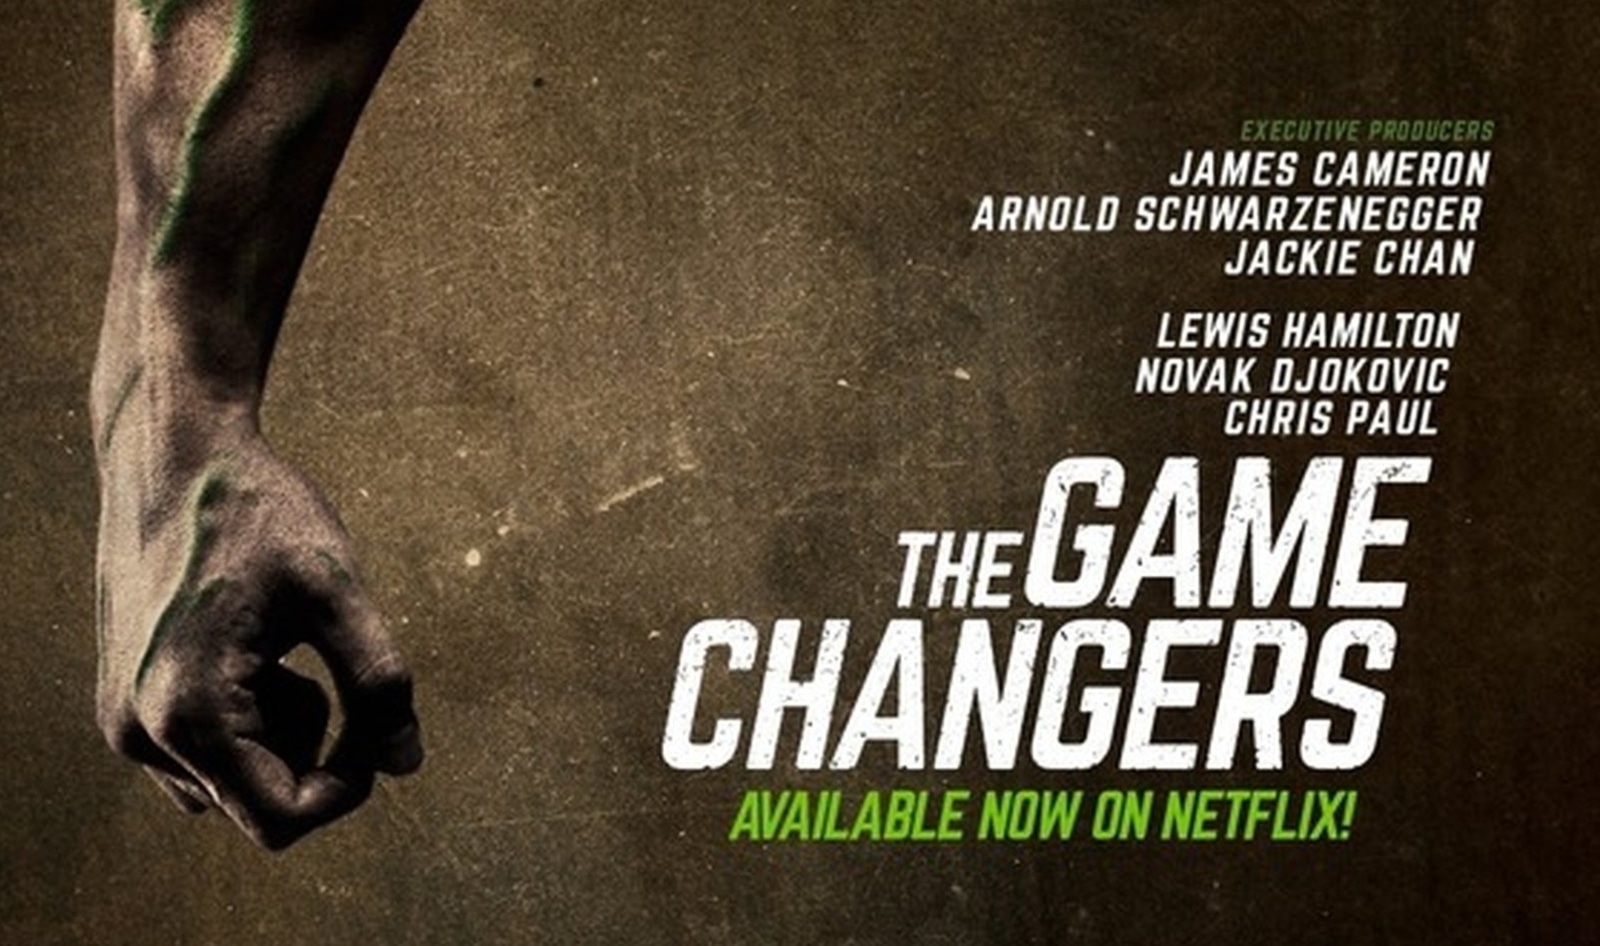 Thanks to LeBron James, Vegan Documentary 'The Game Changers' Gets a Sequel